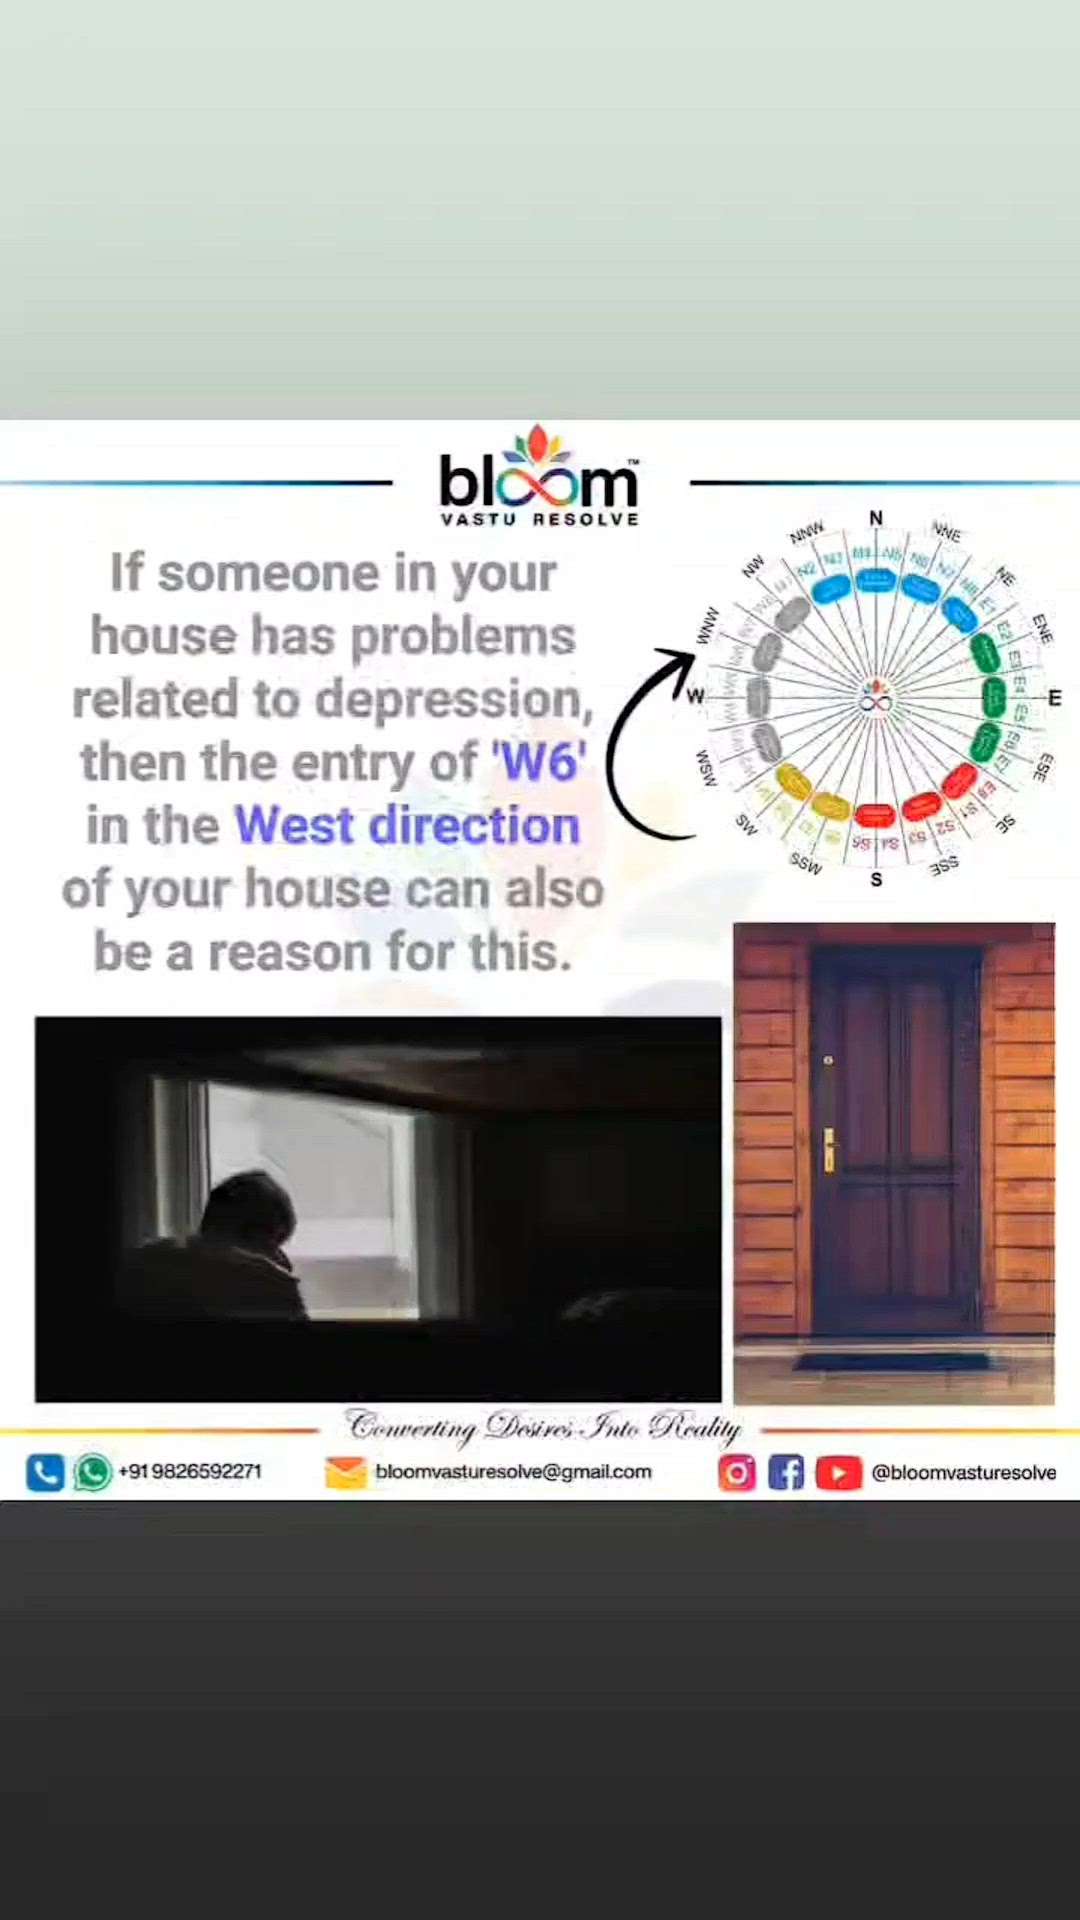 Your queries and comments are always welcome.
For more Vastu please follow @bloomvasturesolve
on YouTube, Instagram & Facebook
.
.
For personal consultation, feel free to contact certified MahaVastu Expert through
M - 9826592271
Or
bloomvasturesolve@gmail.com
#vastu #वास्तु #mahavastu #mahavastuexpert #bloomvasturesolve  #vastureels #vastulogy #vastuexpert  #vasturemedies  #vastuforhome #vastuforpeace #vastudosh #numerology #vastuforgrowth #maindoor #westzone #entrance #vastuforentrance